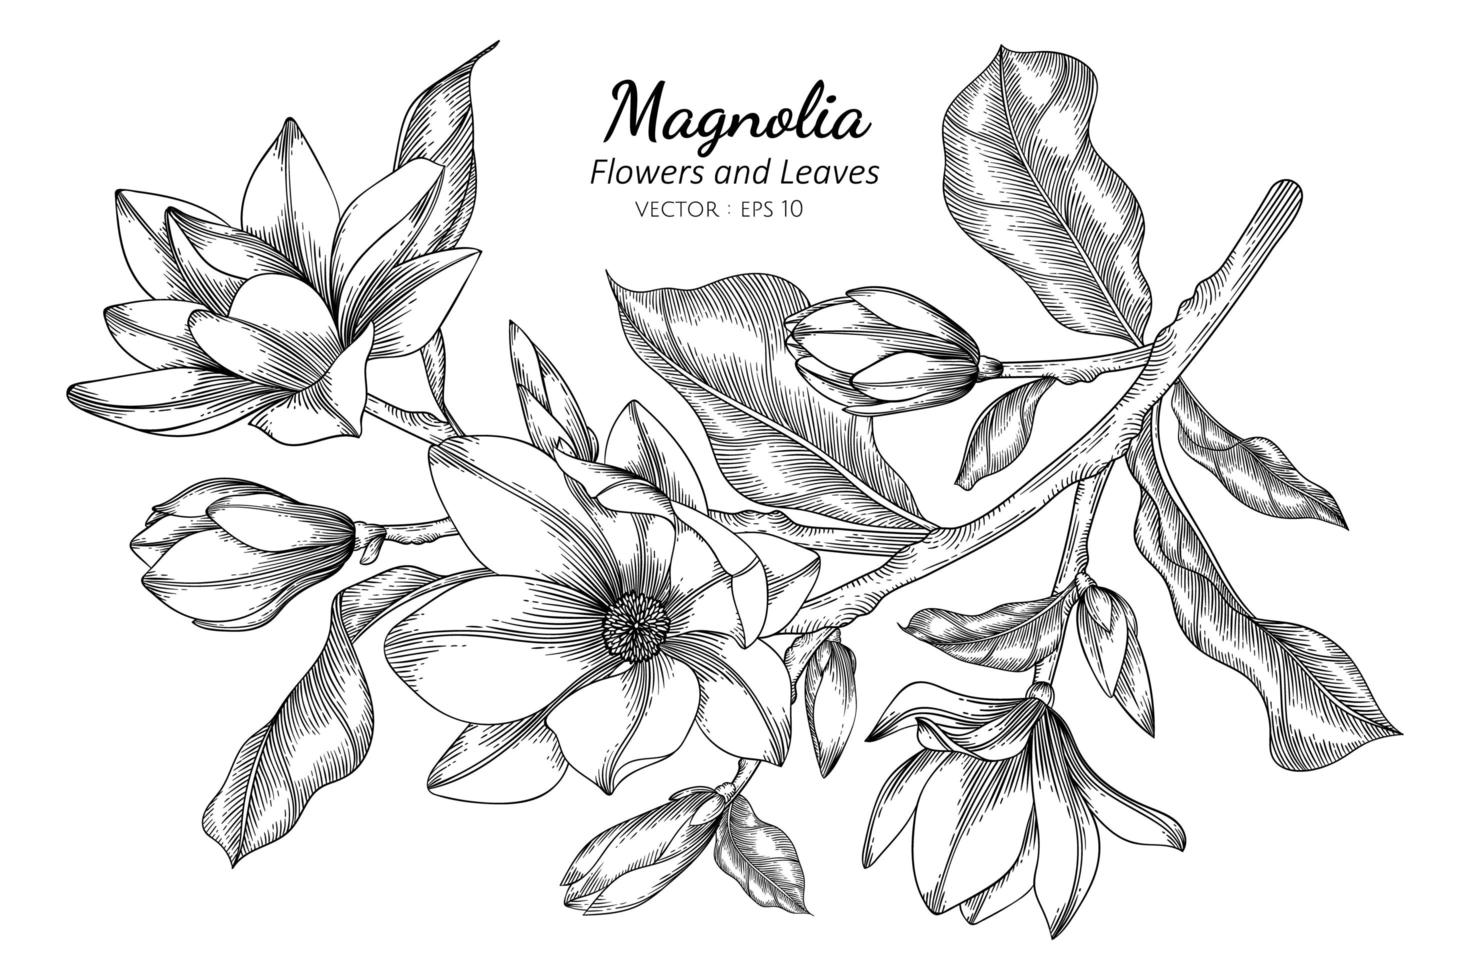 Magnolia flowers and leaves drawing illustration with line art on white background. vector